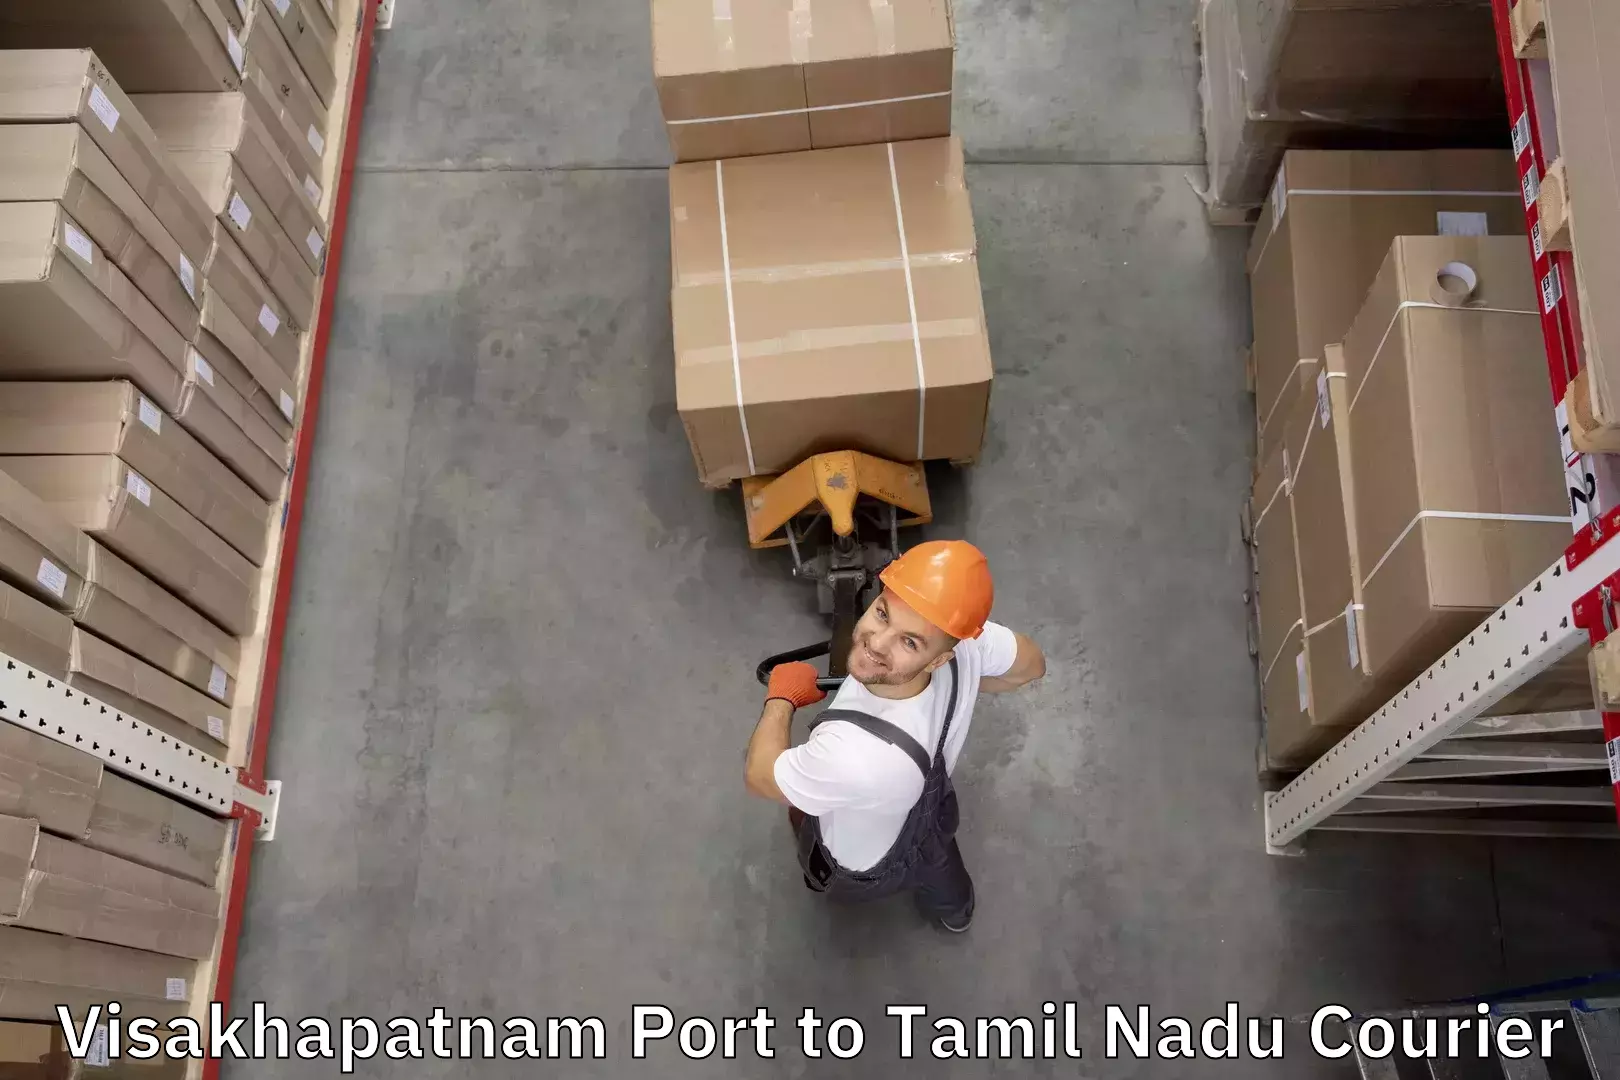 Luggage delivery app Visakhapatnam Port to Musiri